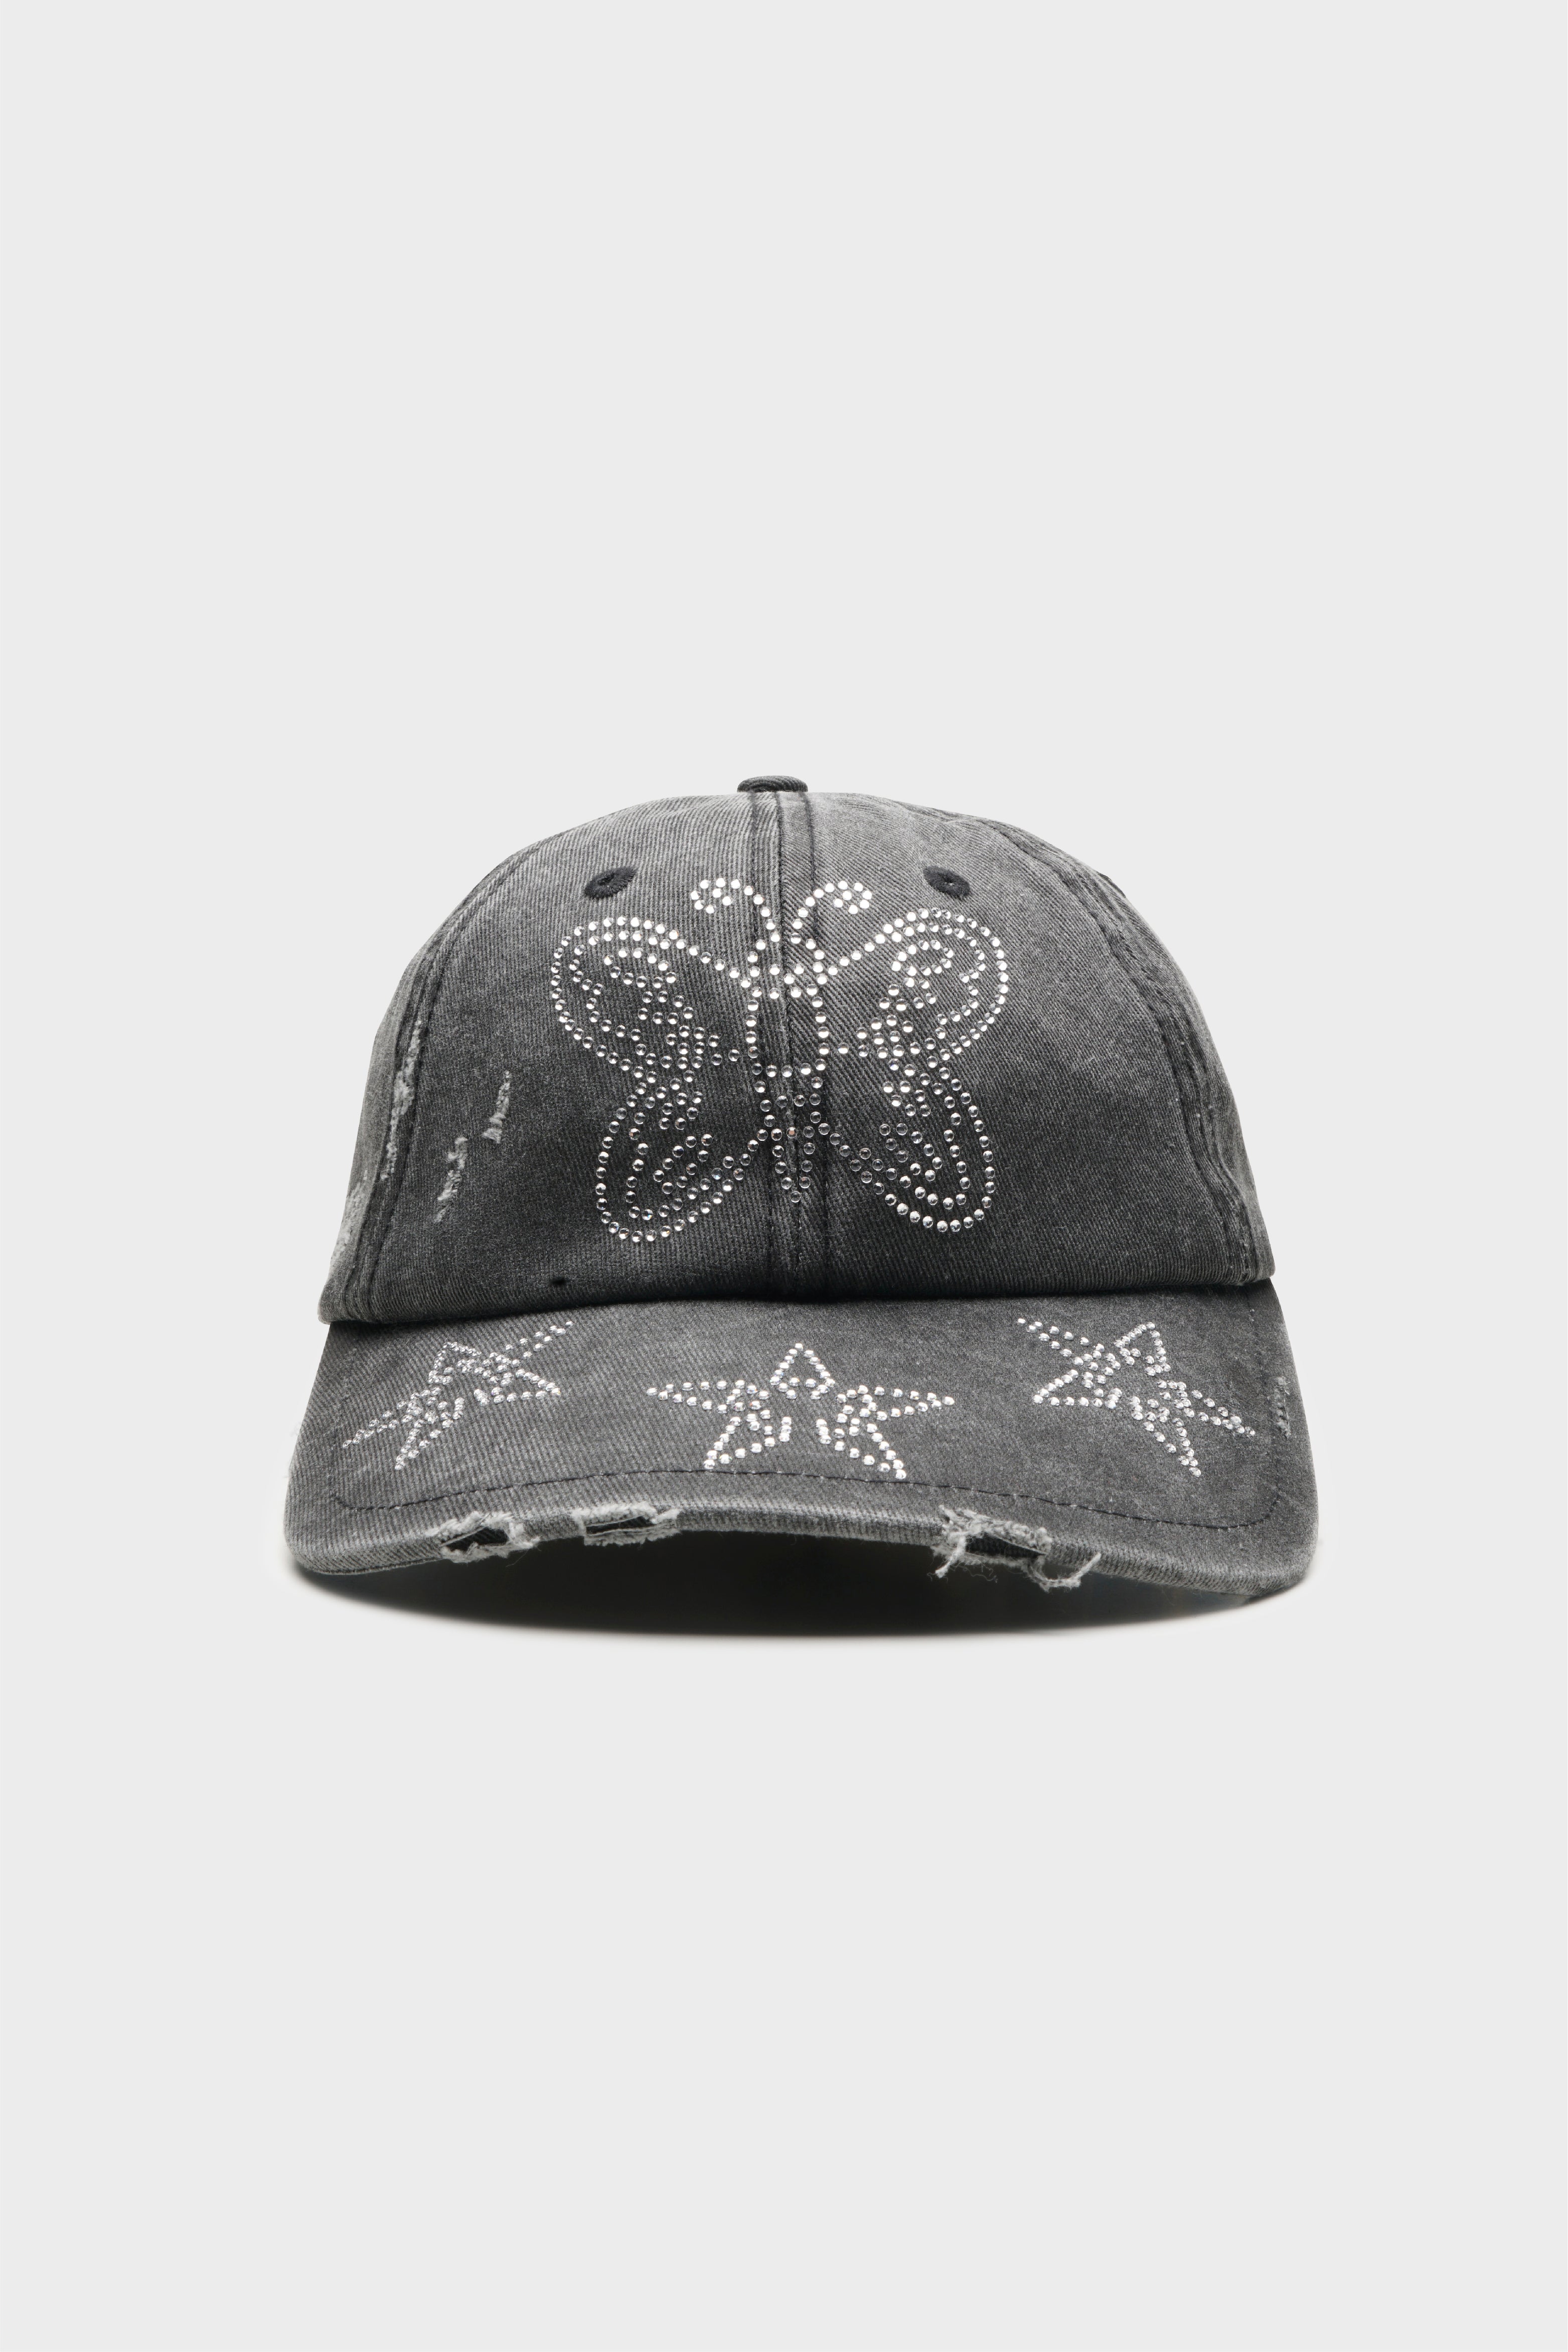 Selectshop FRAME - PERKS AND MINI Varg 2.0 Distressed Cap All-accessories Concept Store Dubai